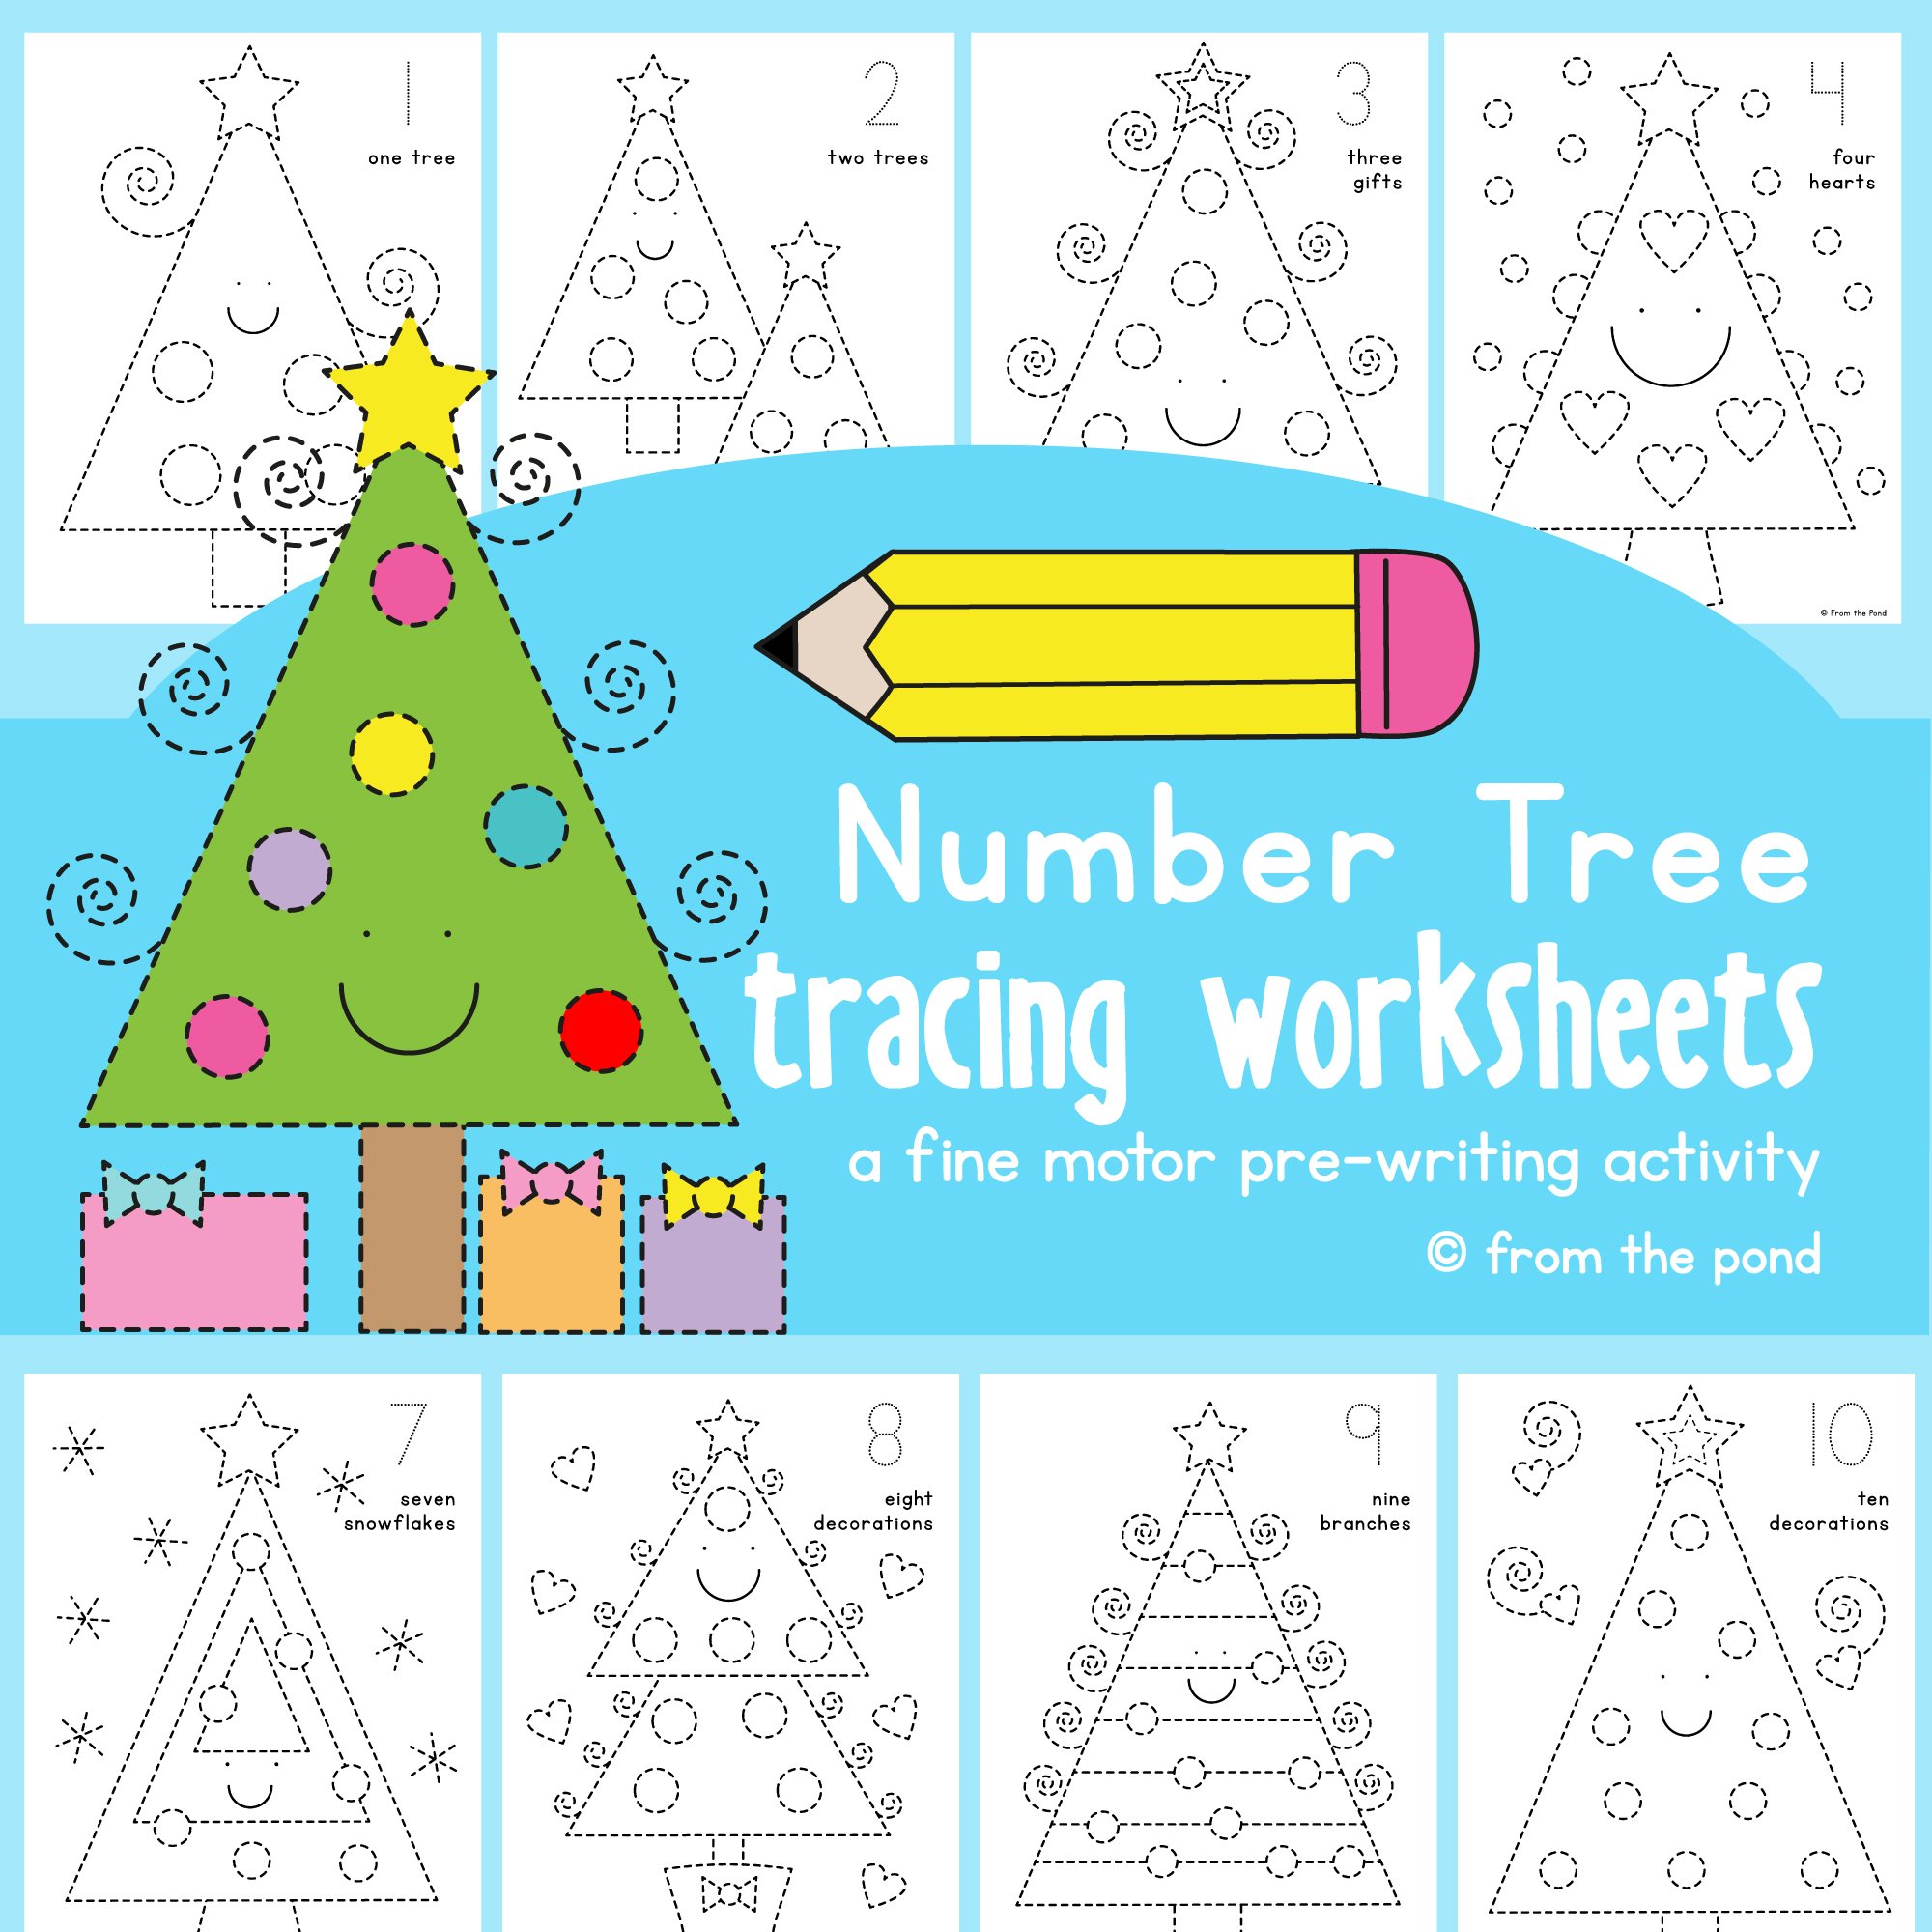 Number Tree Tracing